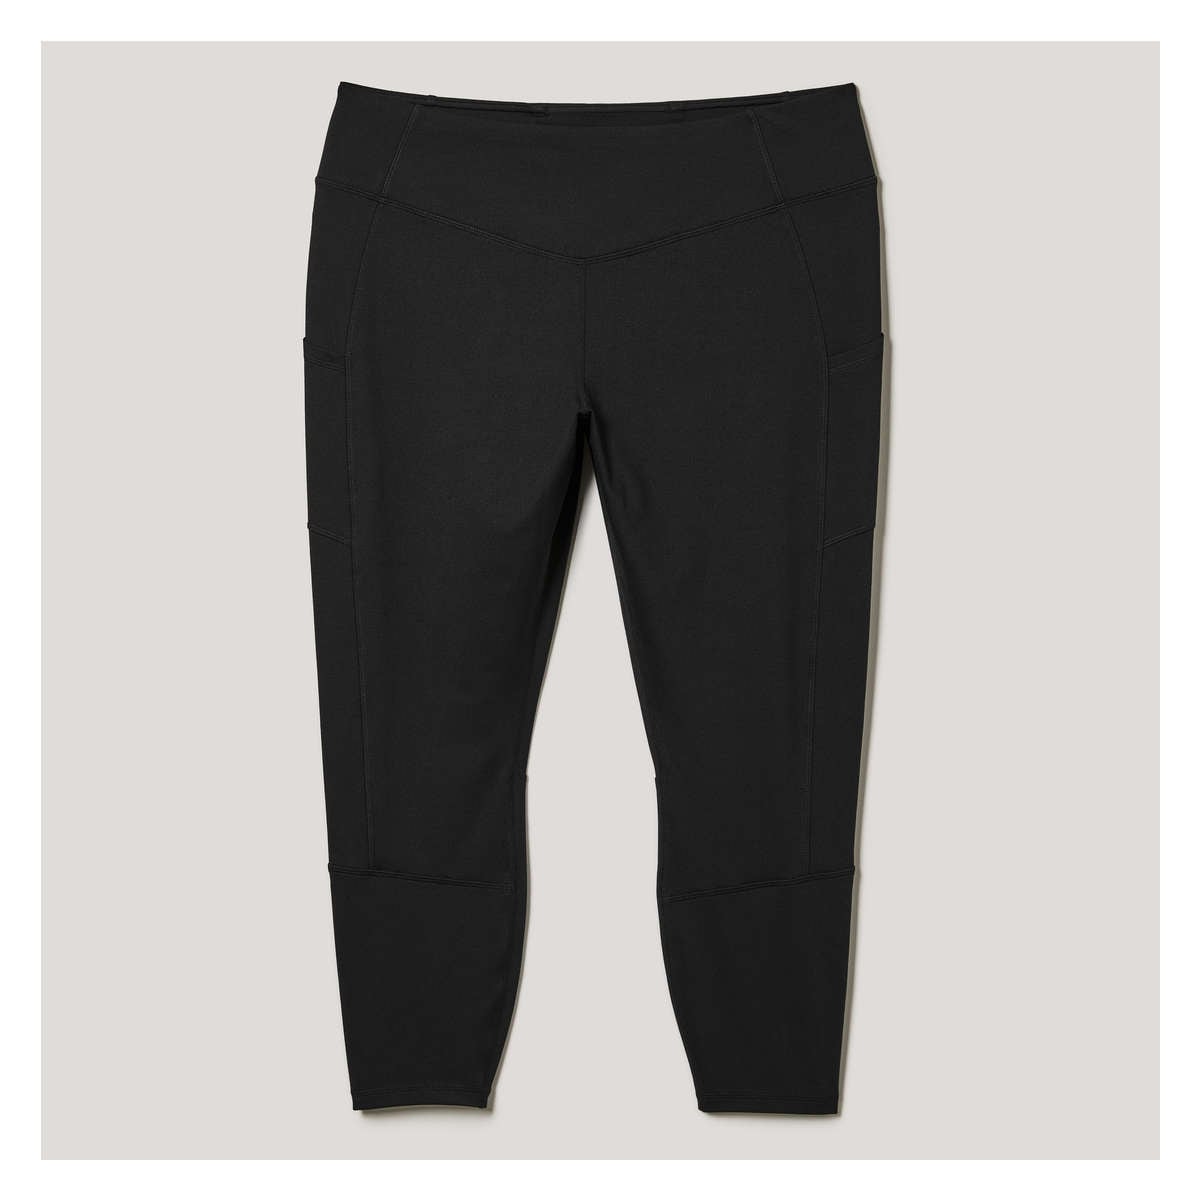 Four-Way Stretch Active Legging in Black from Joe Fresh